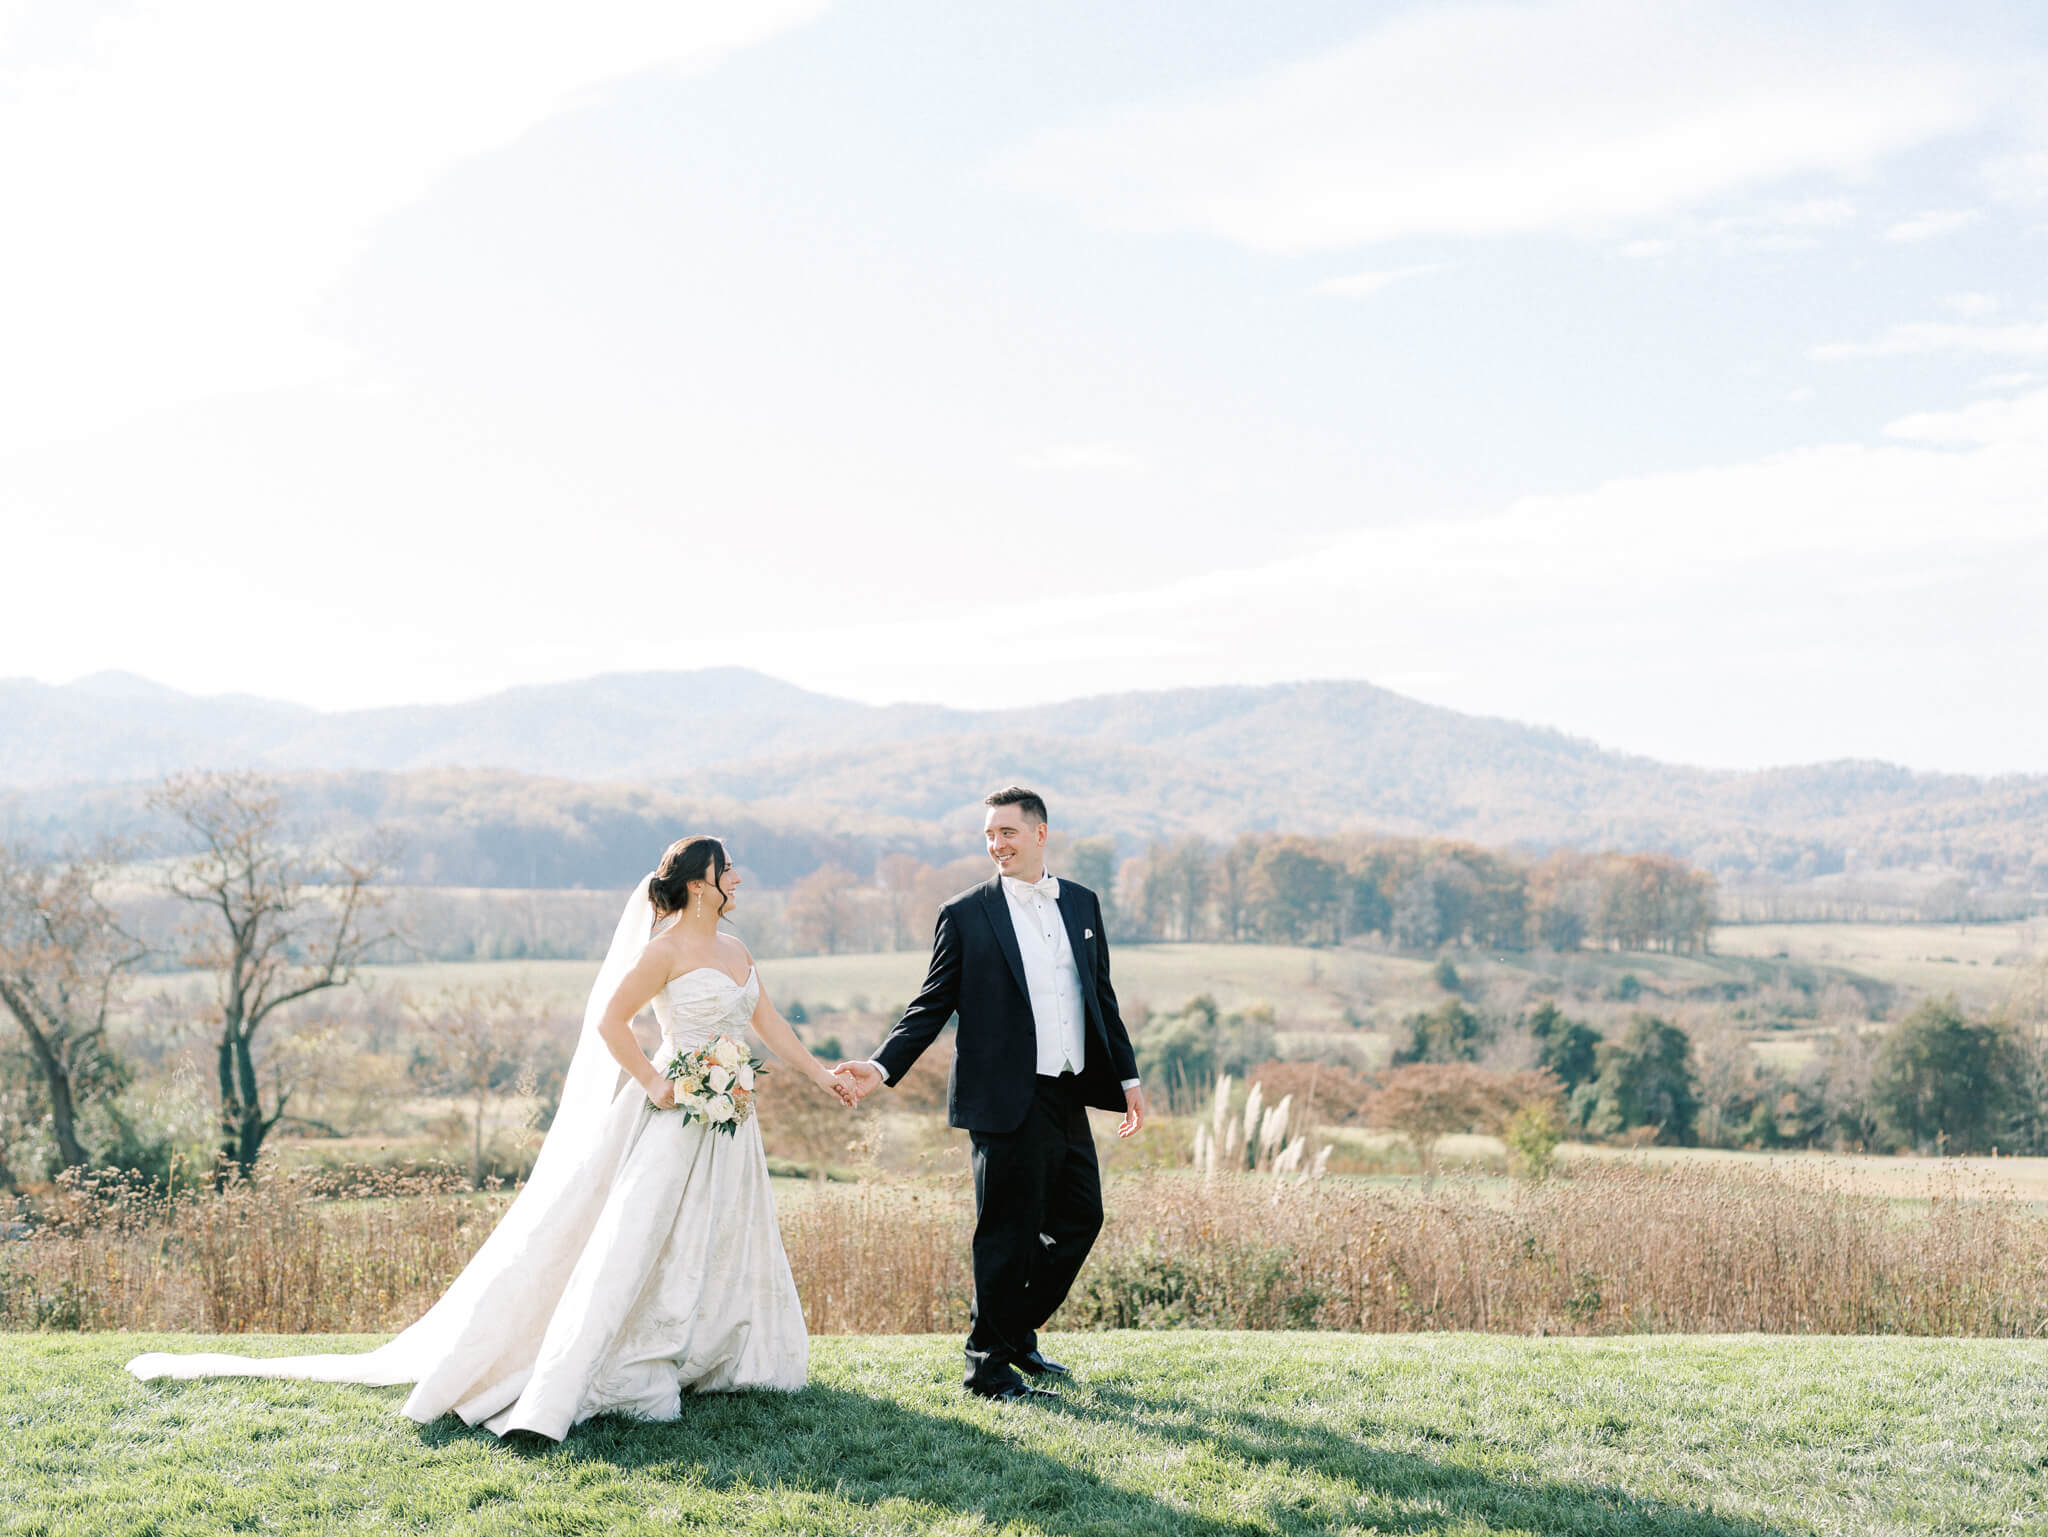 A groom leading his bride in front of the stunning mountain views at a Pippin Hill wedding.